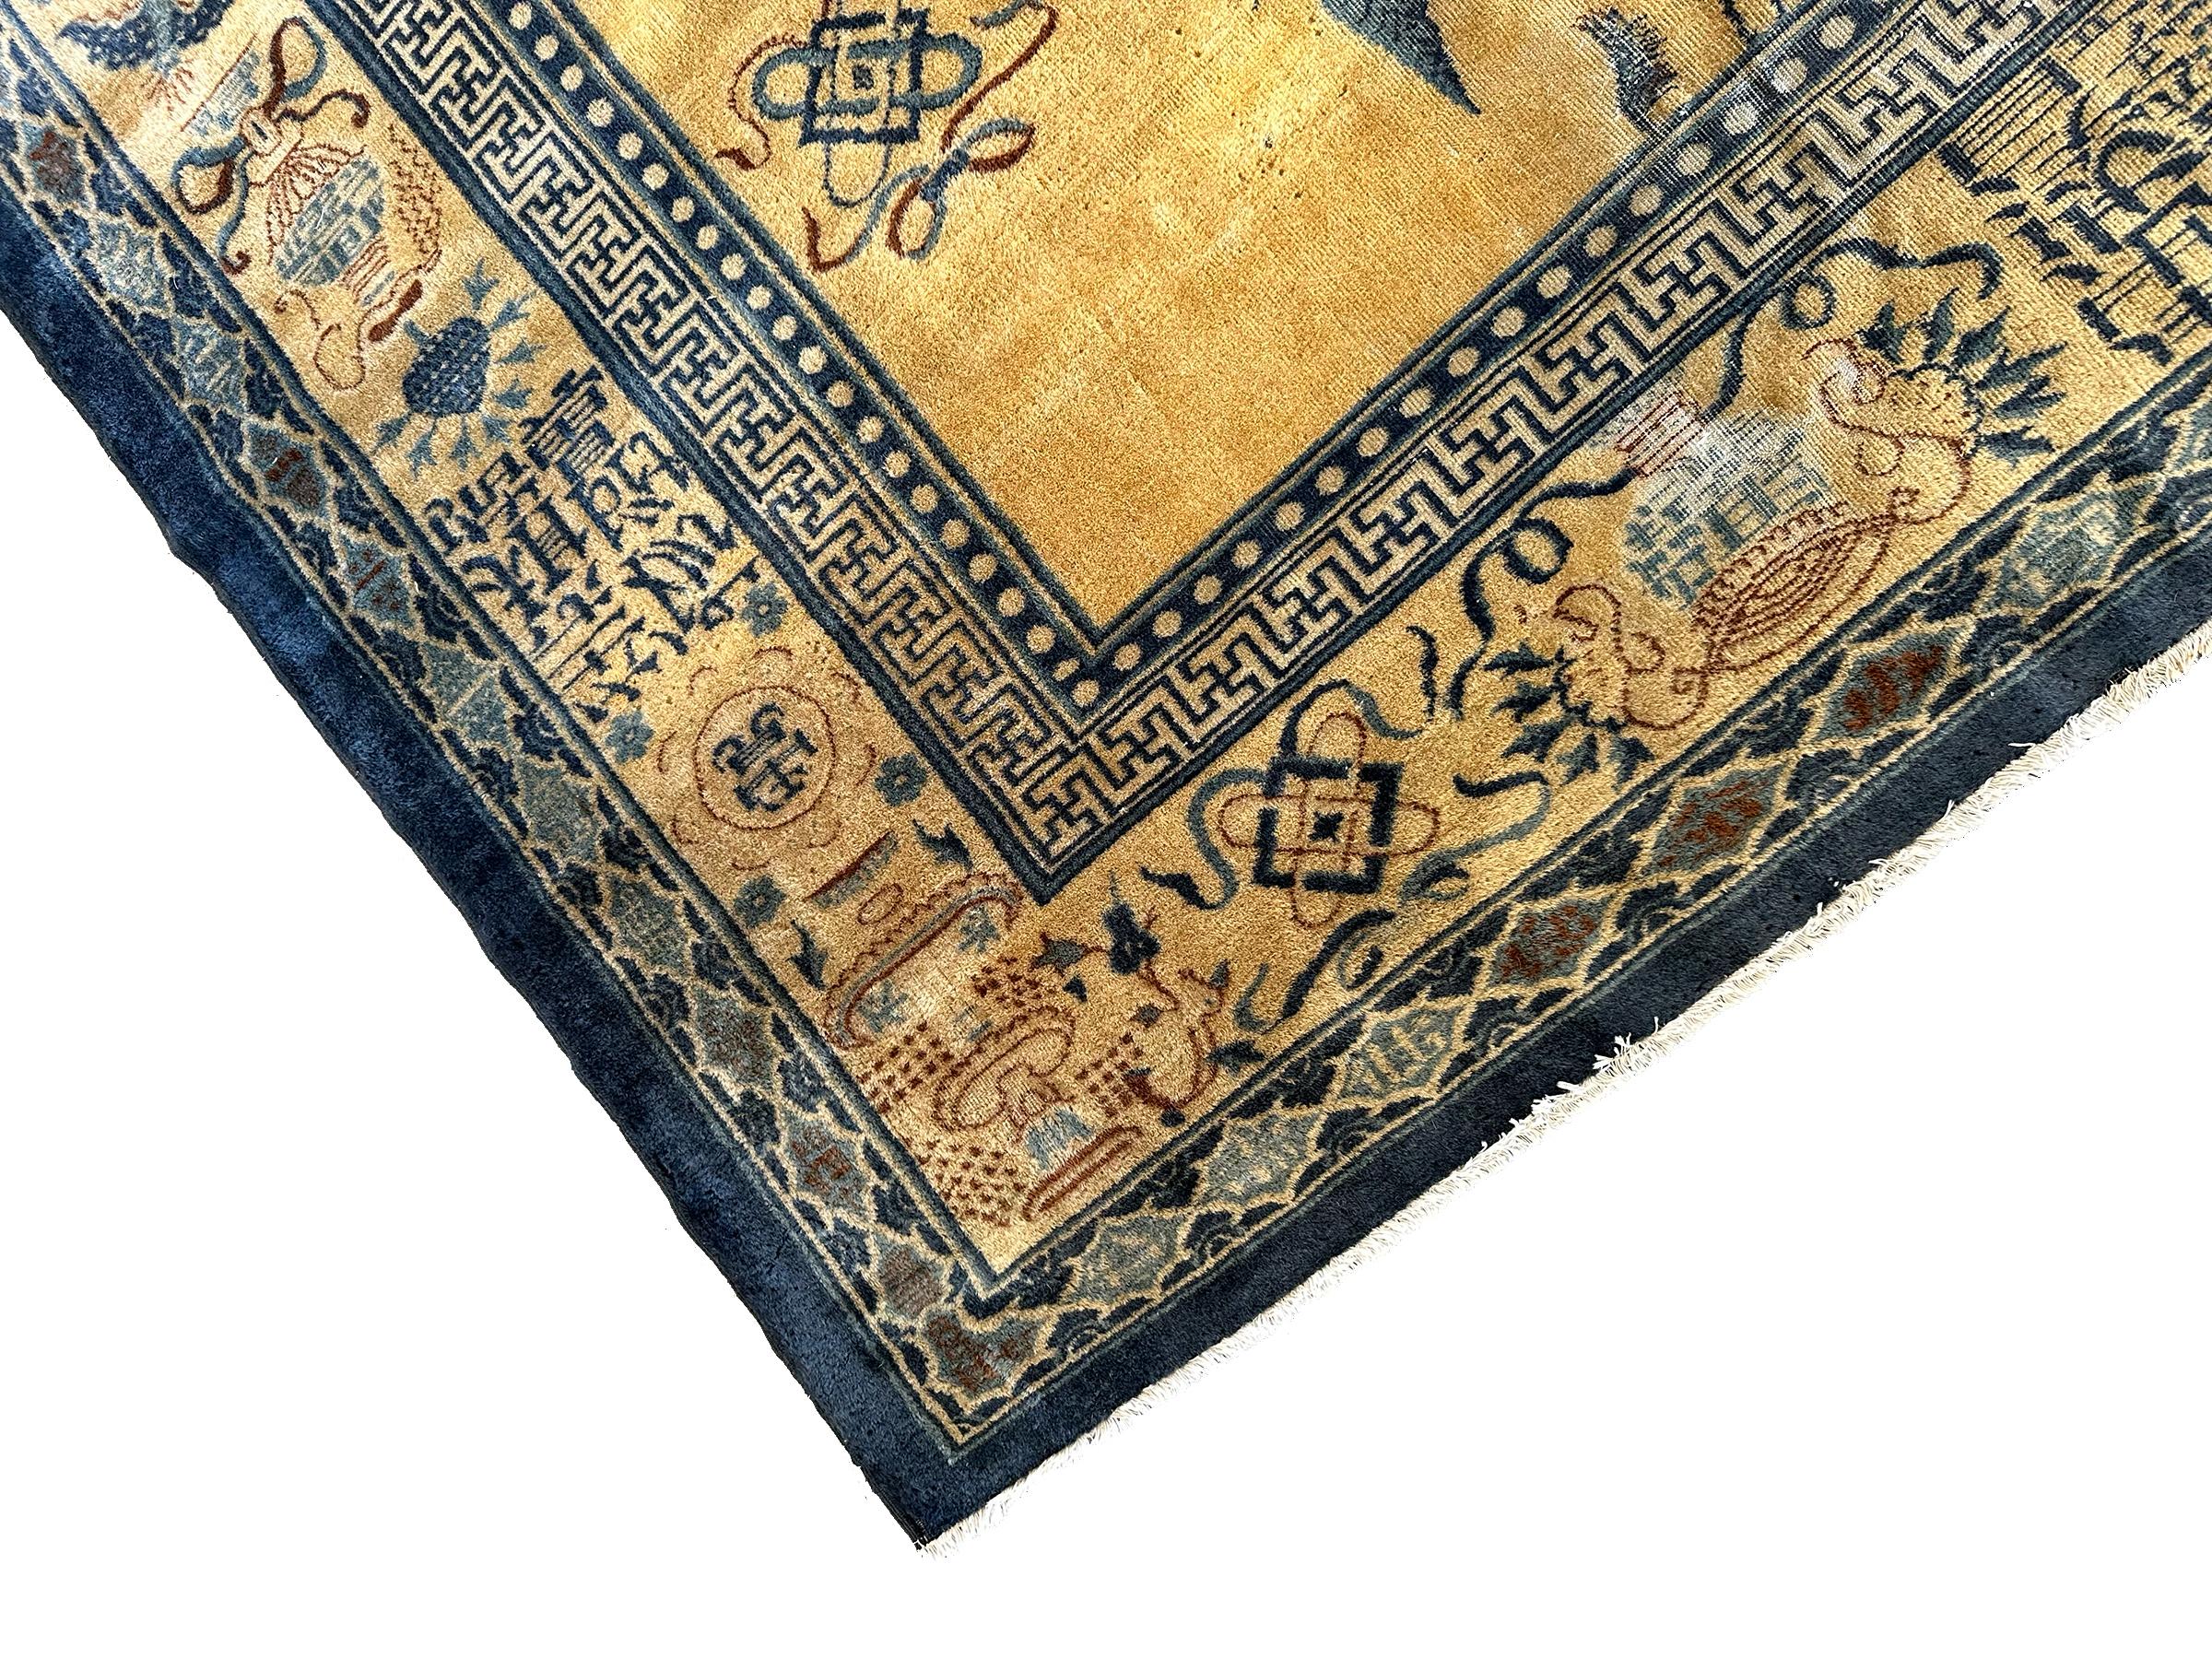 Rare Antique Chinese Rug Pre-1900 Chinese Symbols 12x15 361cm x 427cm Pre-1900 For Sale 3